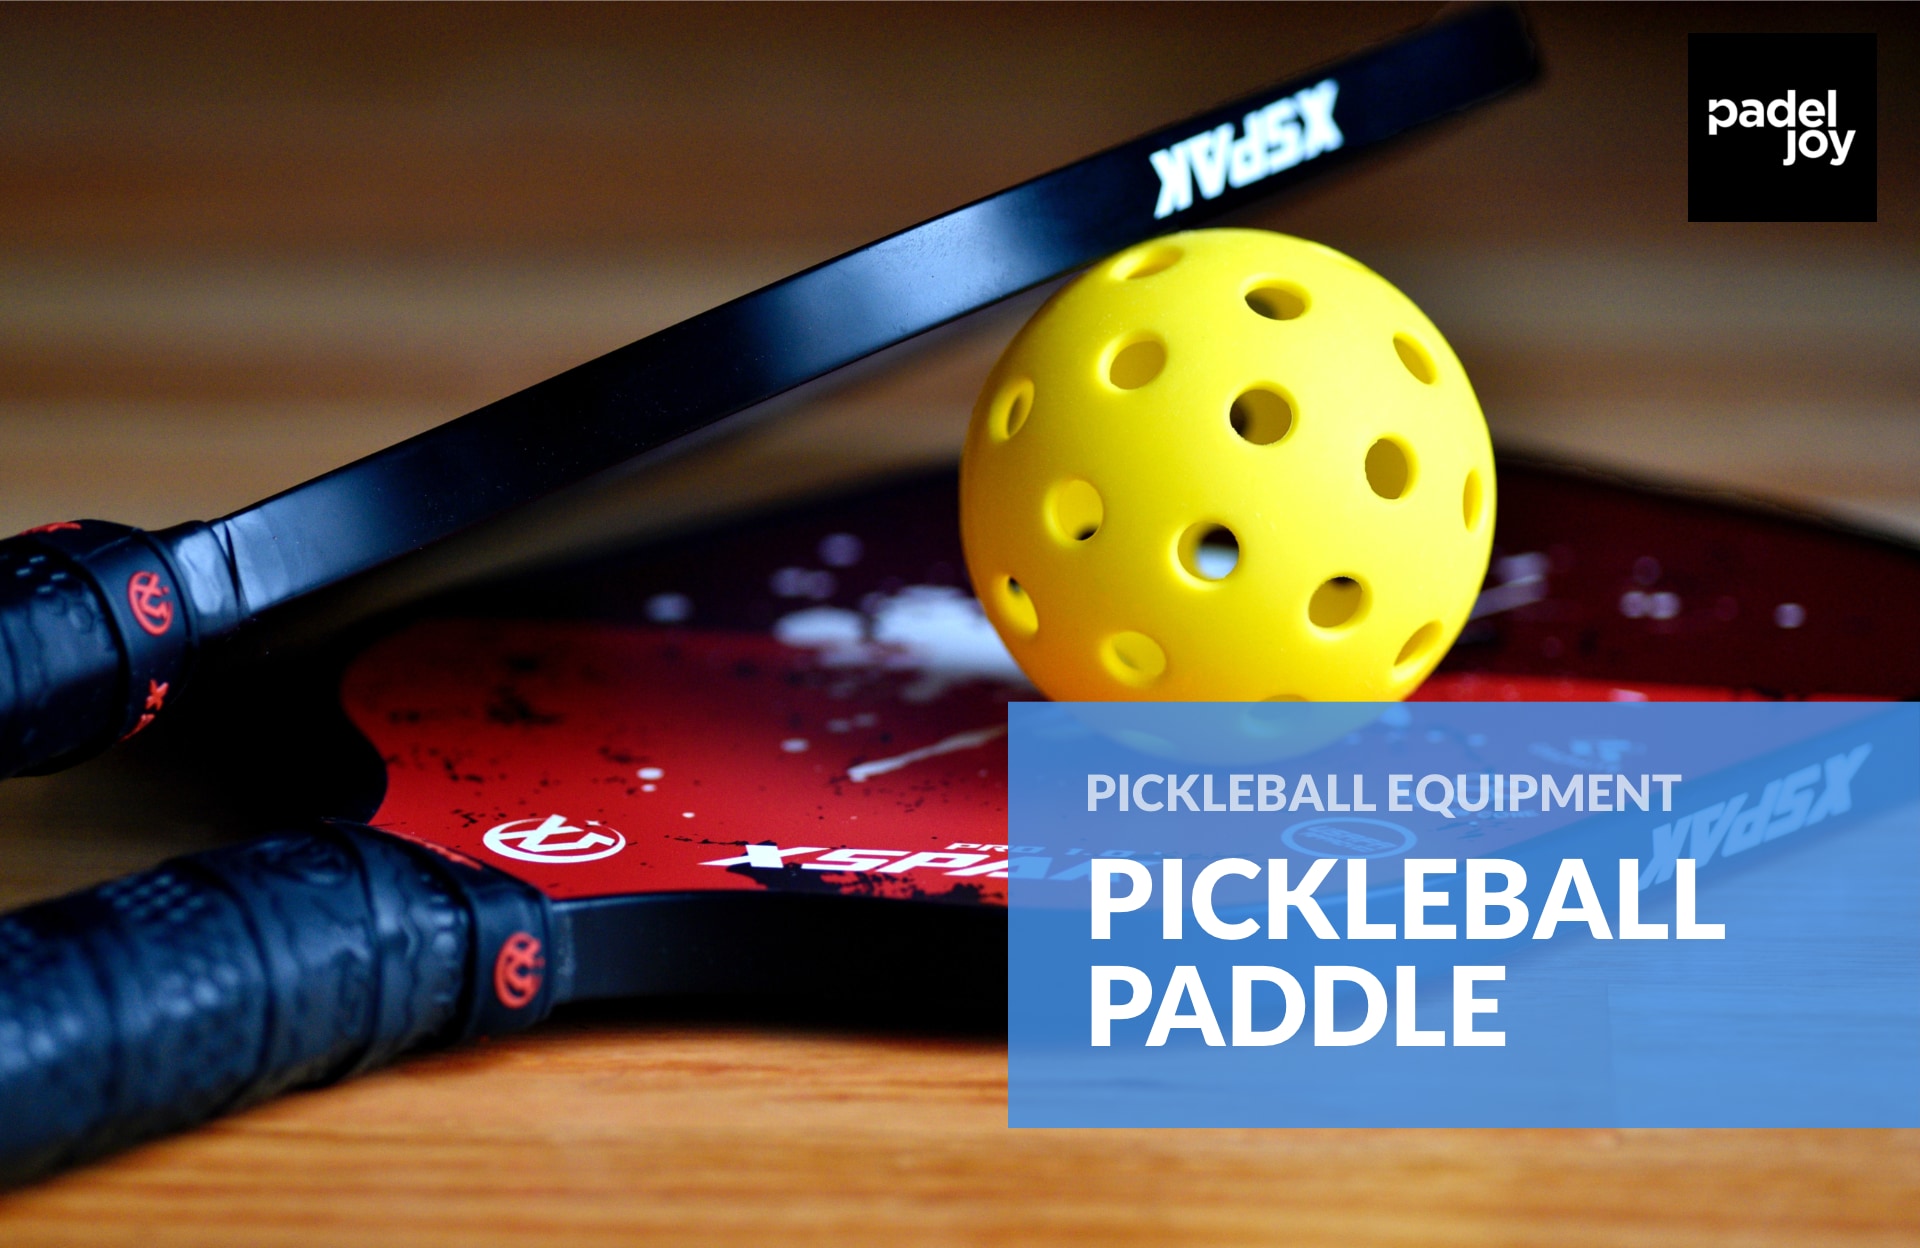 To play pickleball you need to get a pickleball paddle